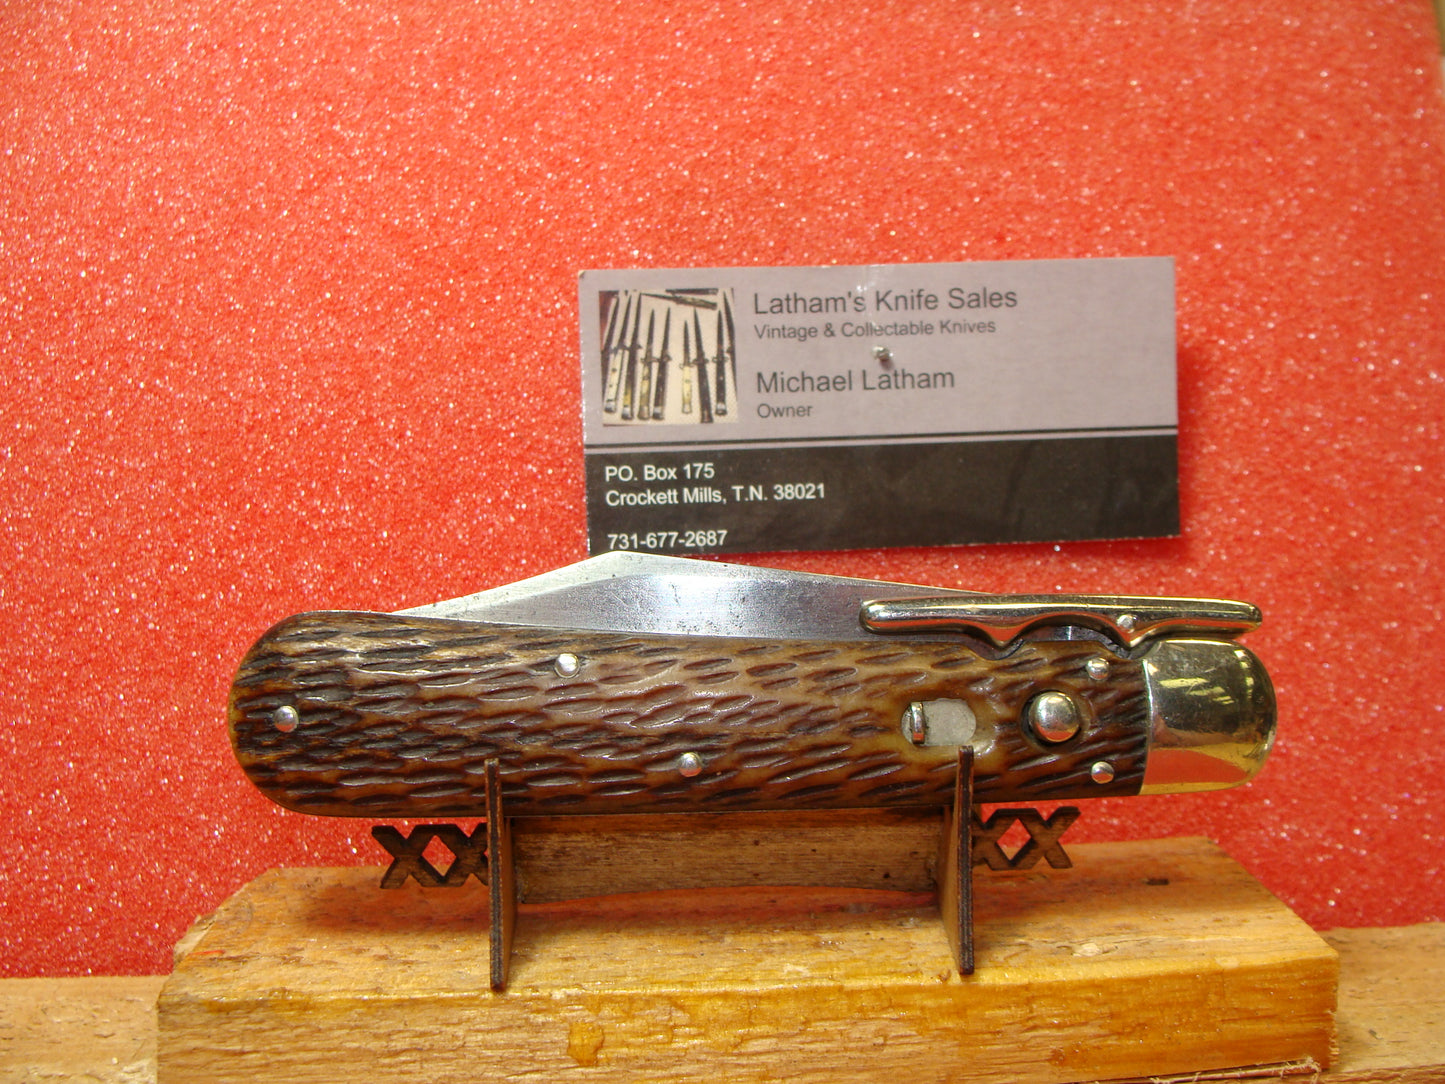 SCHRADE CUT CO. WALDEN NY 1916-46 VINTAGE AMERICAN AUTOMATIC KNIFE 4 7/8" SWING GUARD HUNTER'S PRIDE BROWN JIGGED BONE HANDLES